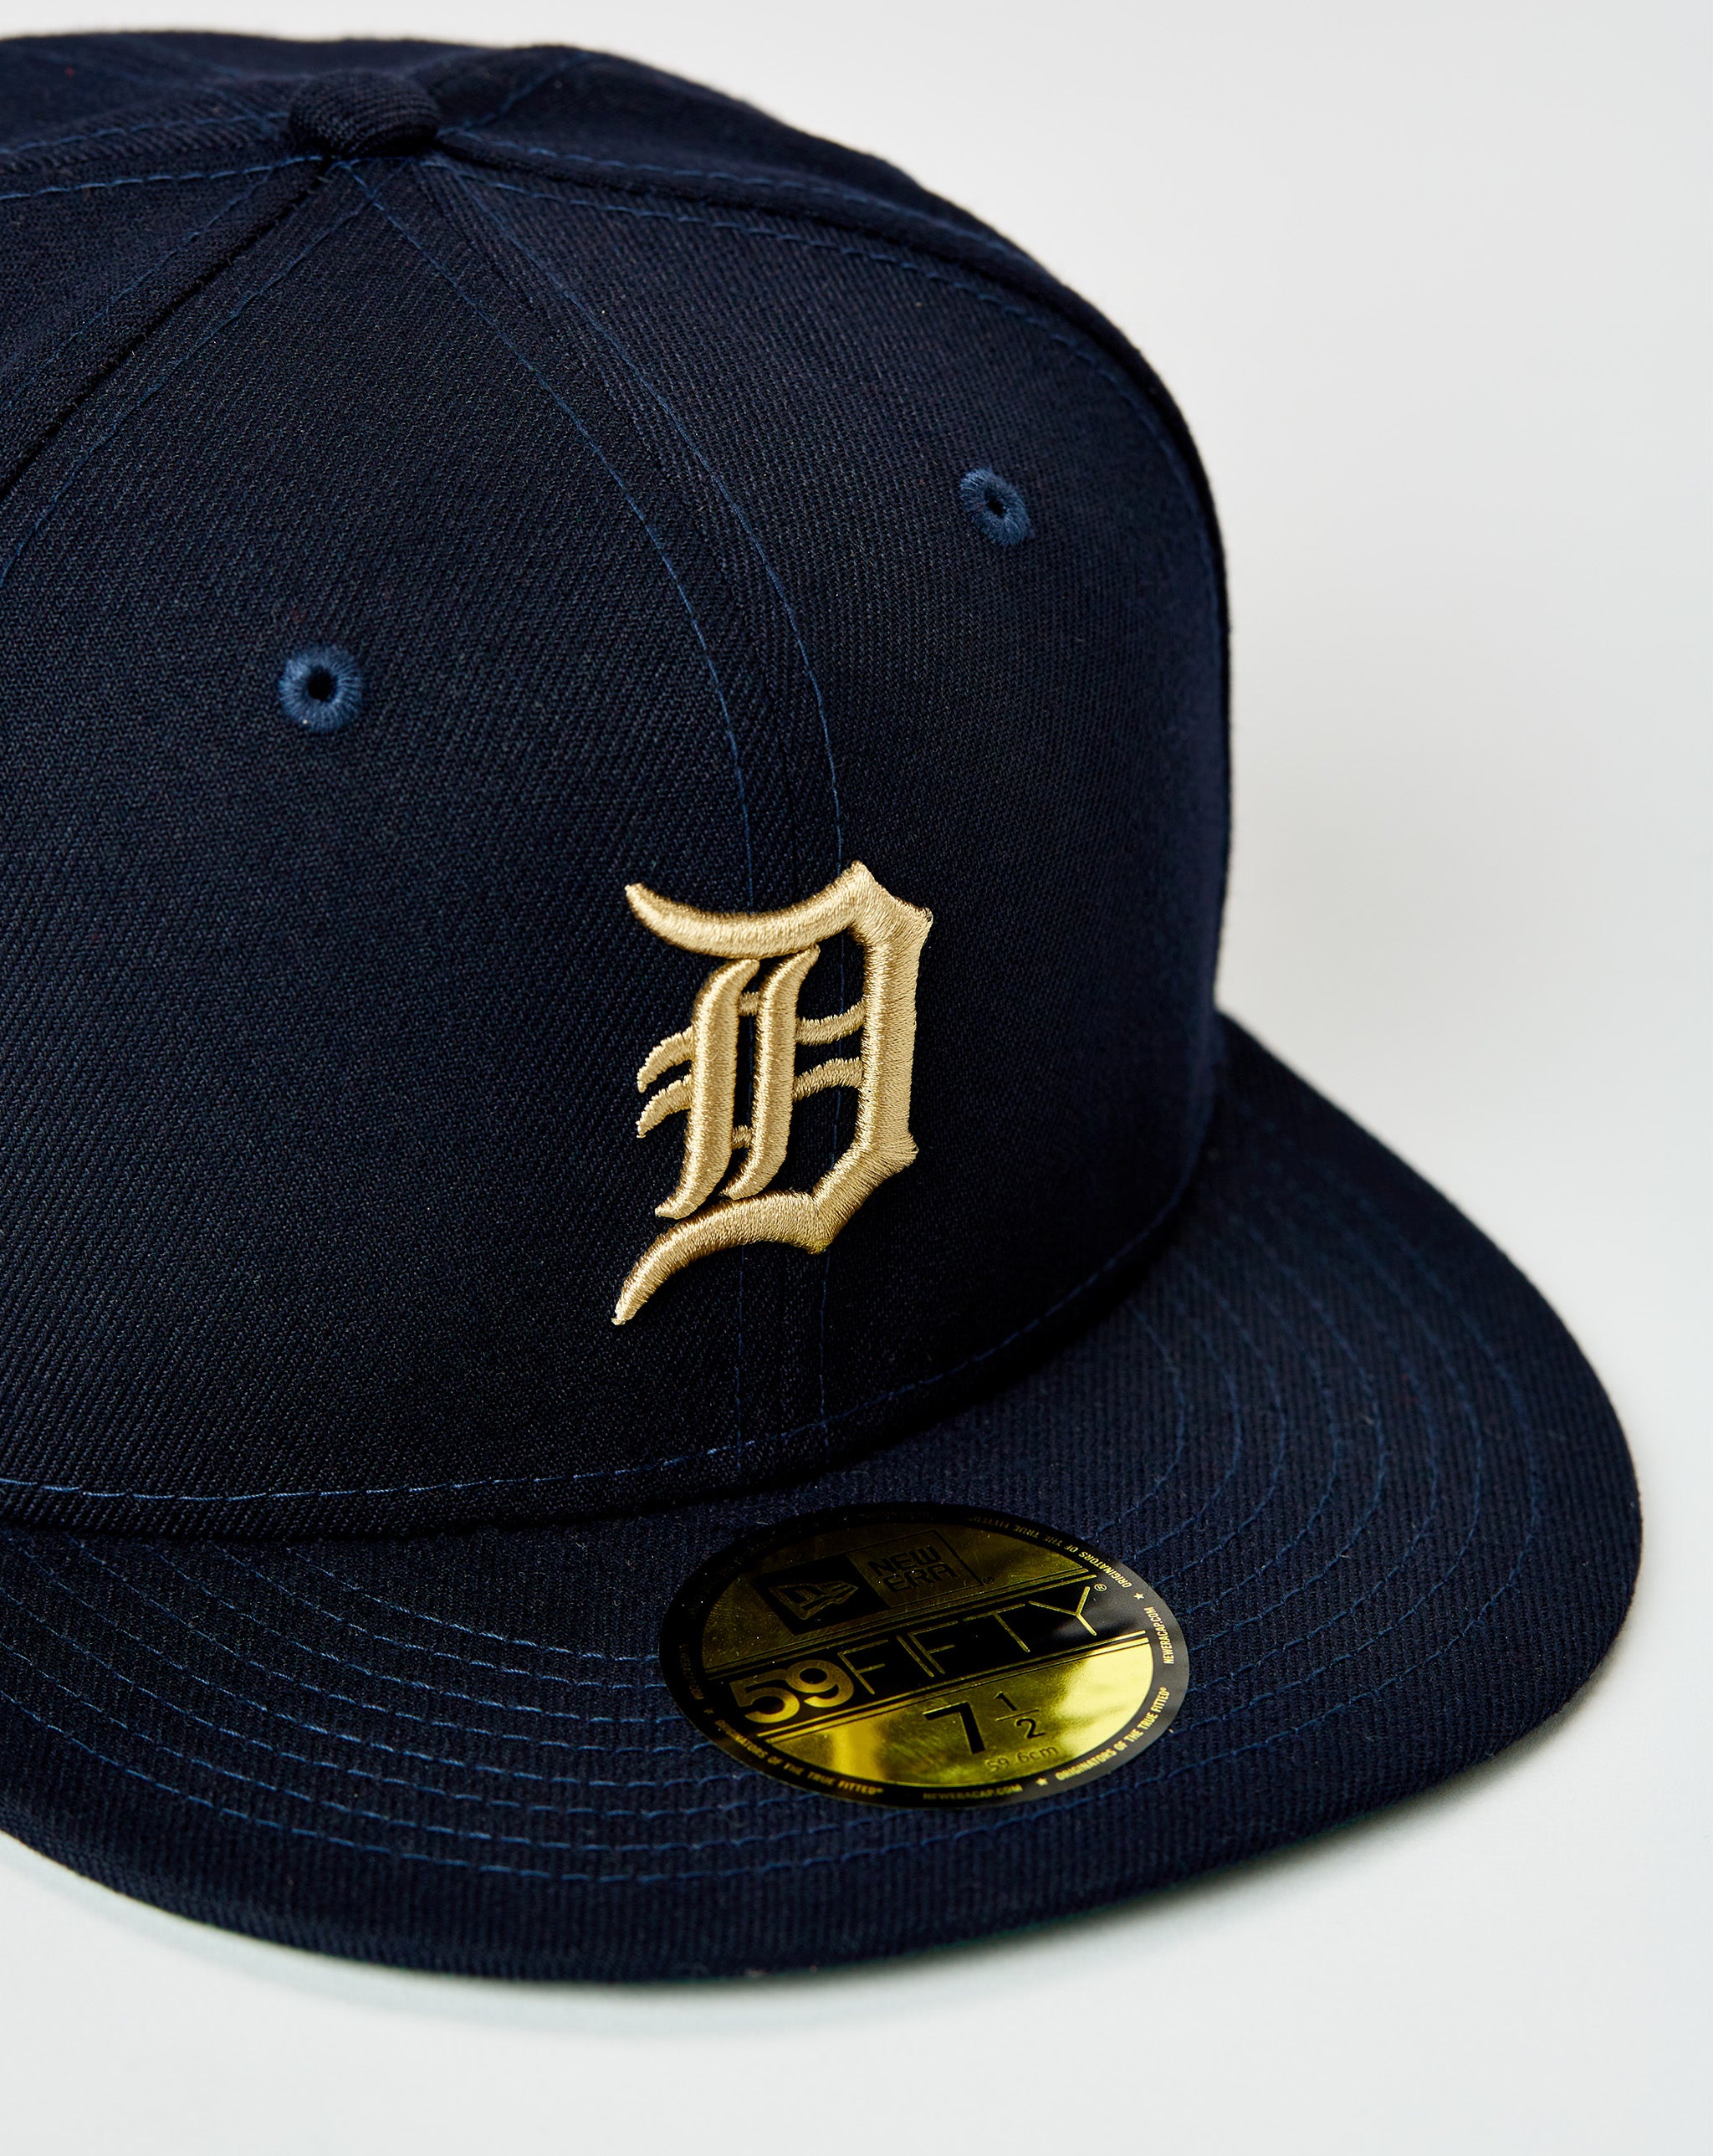 New Era Detroit Tigers Sidepatch 59Fifty  - Cheap Cerbe Jordan outlet